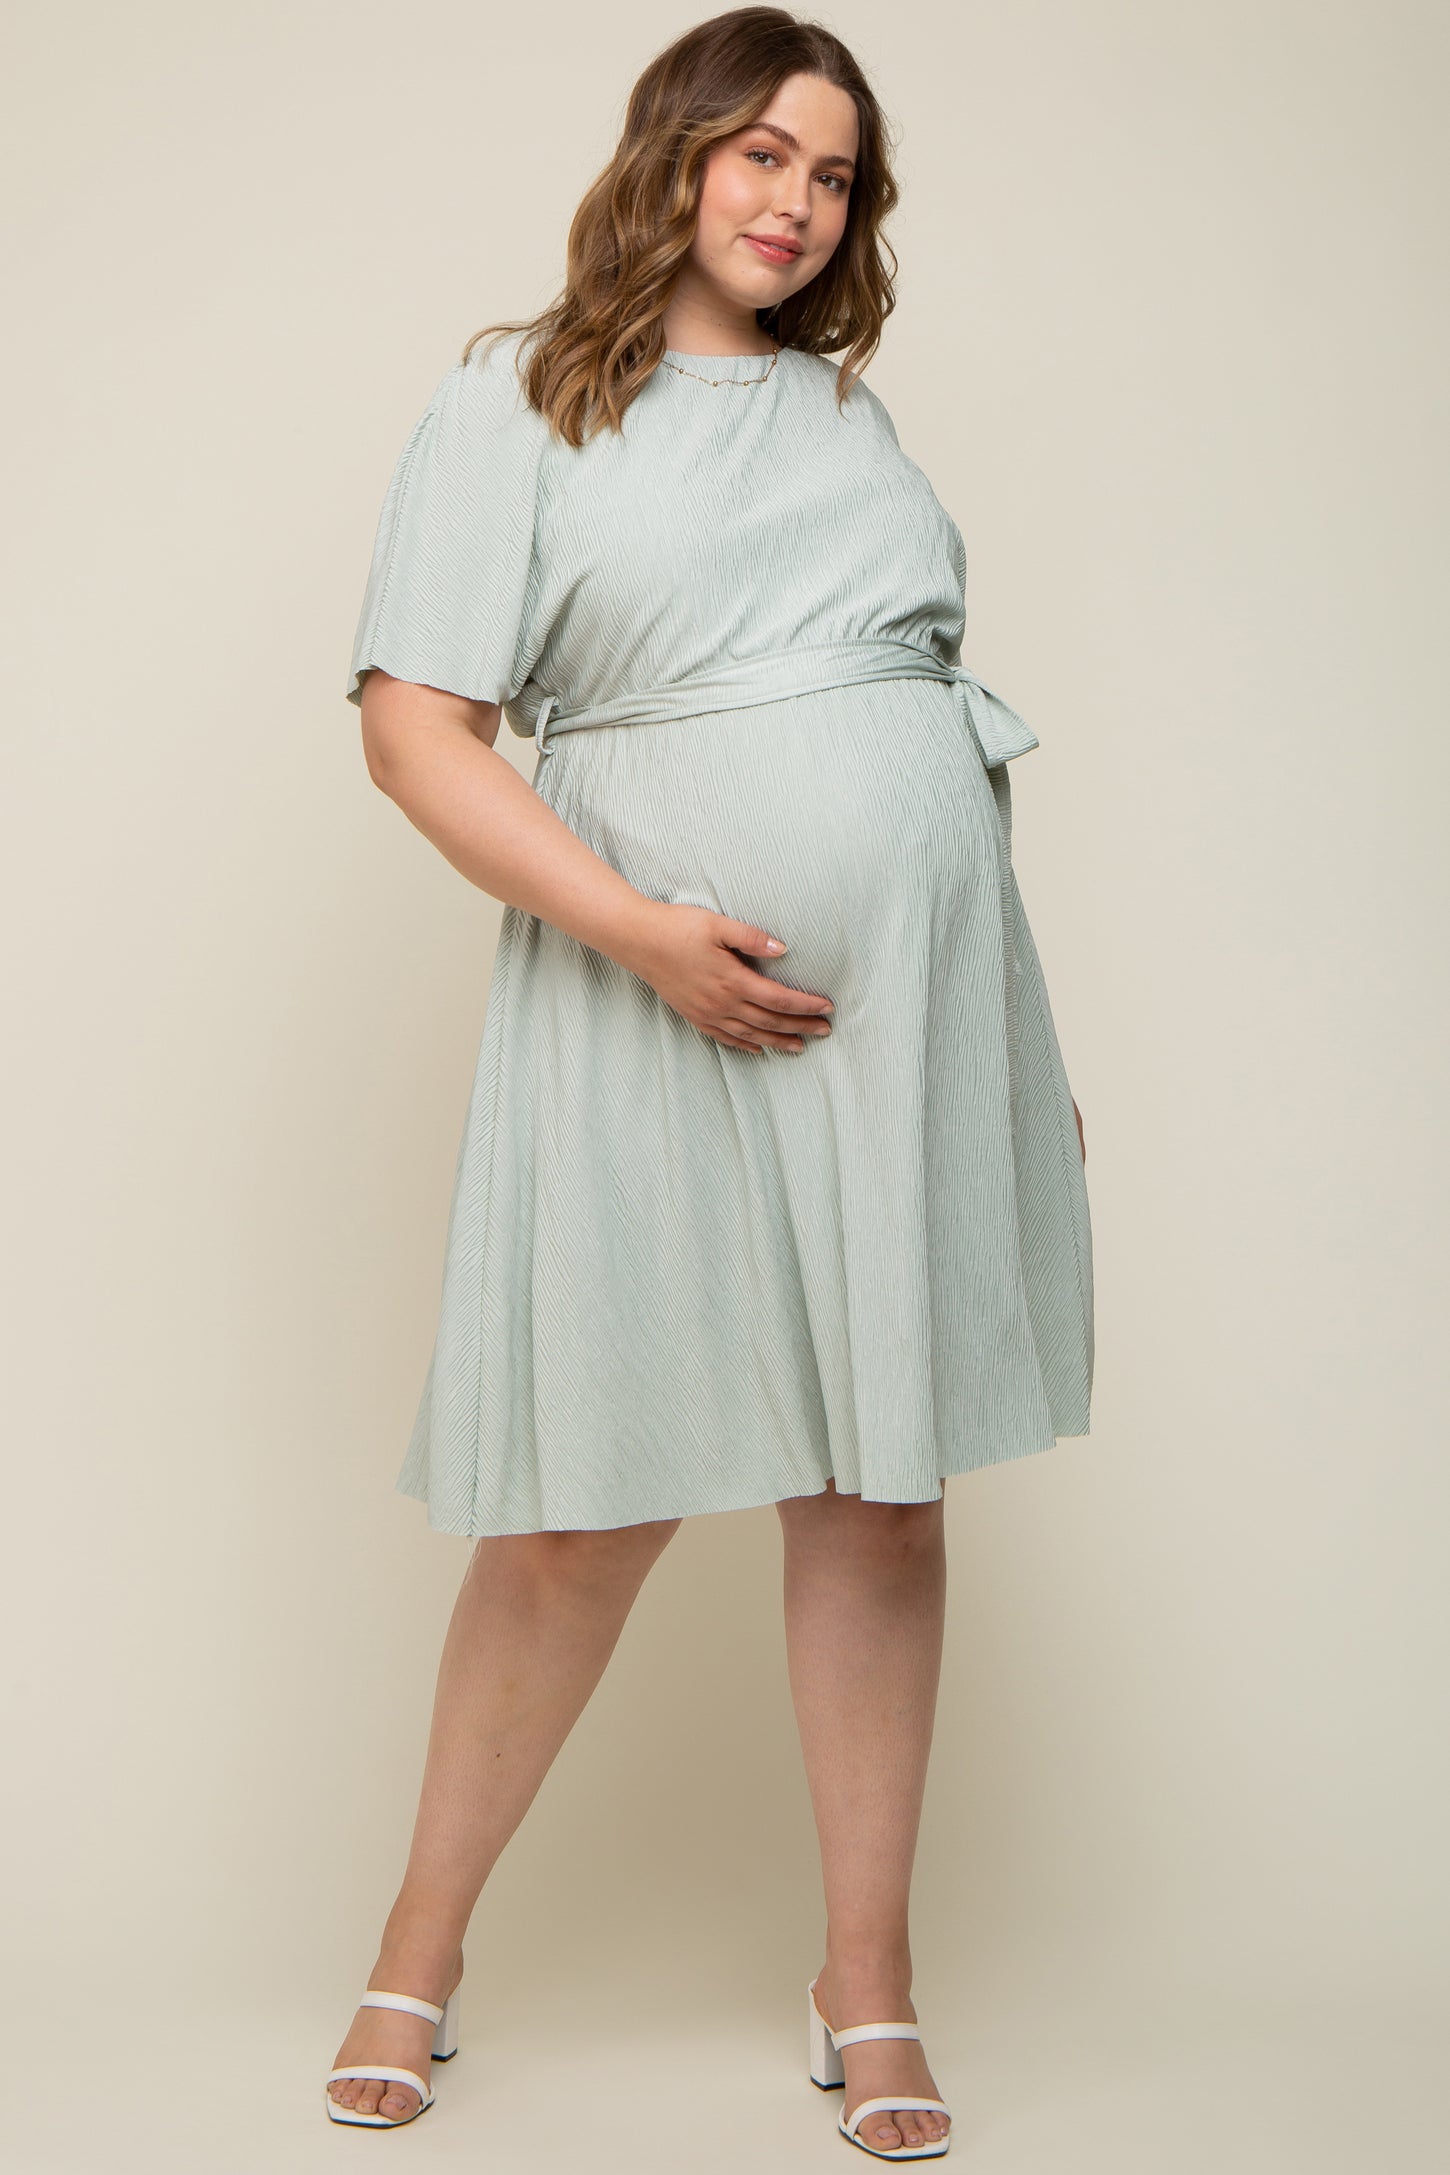 Tie Front Textured Maternity Dress